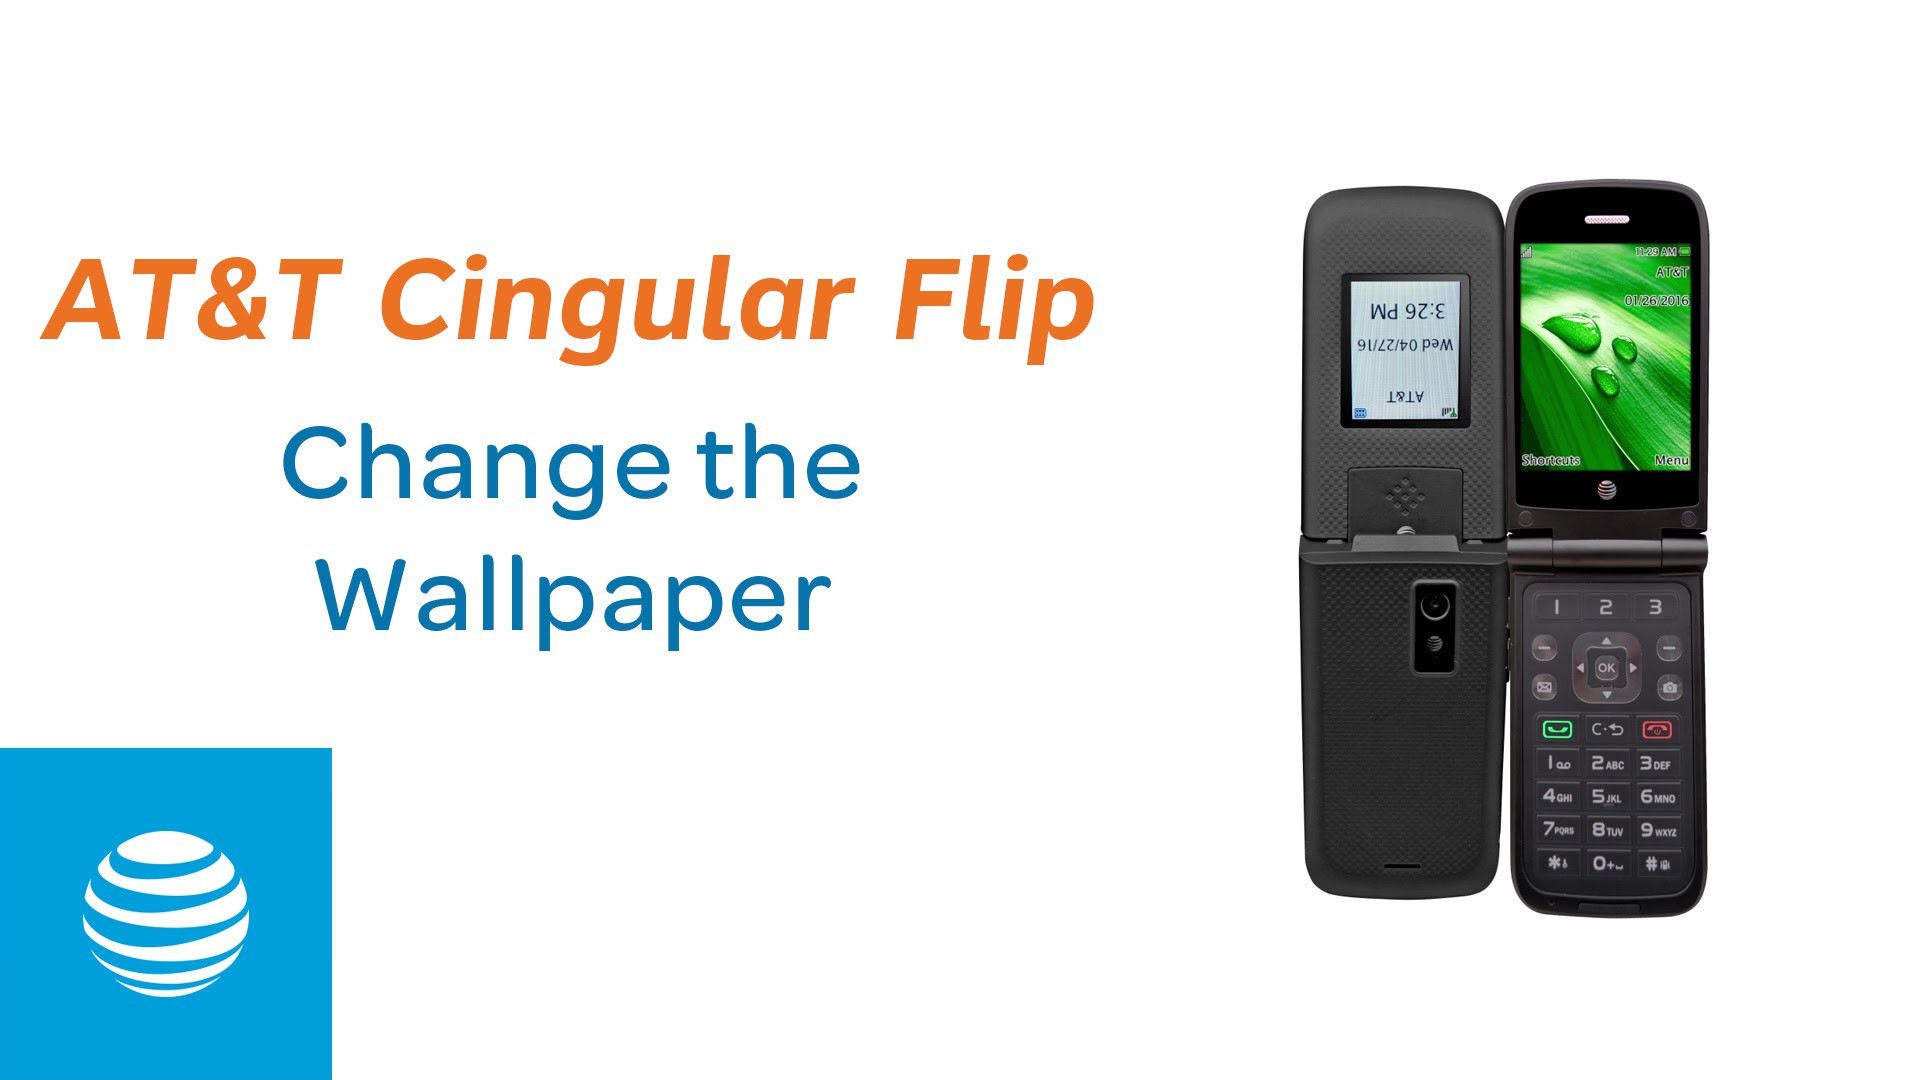 1920x1080 Change the Wallpaper on your AT&T Cingular Flip | AT&T